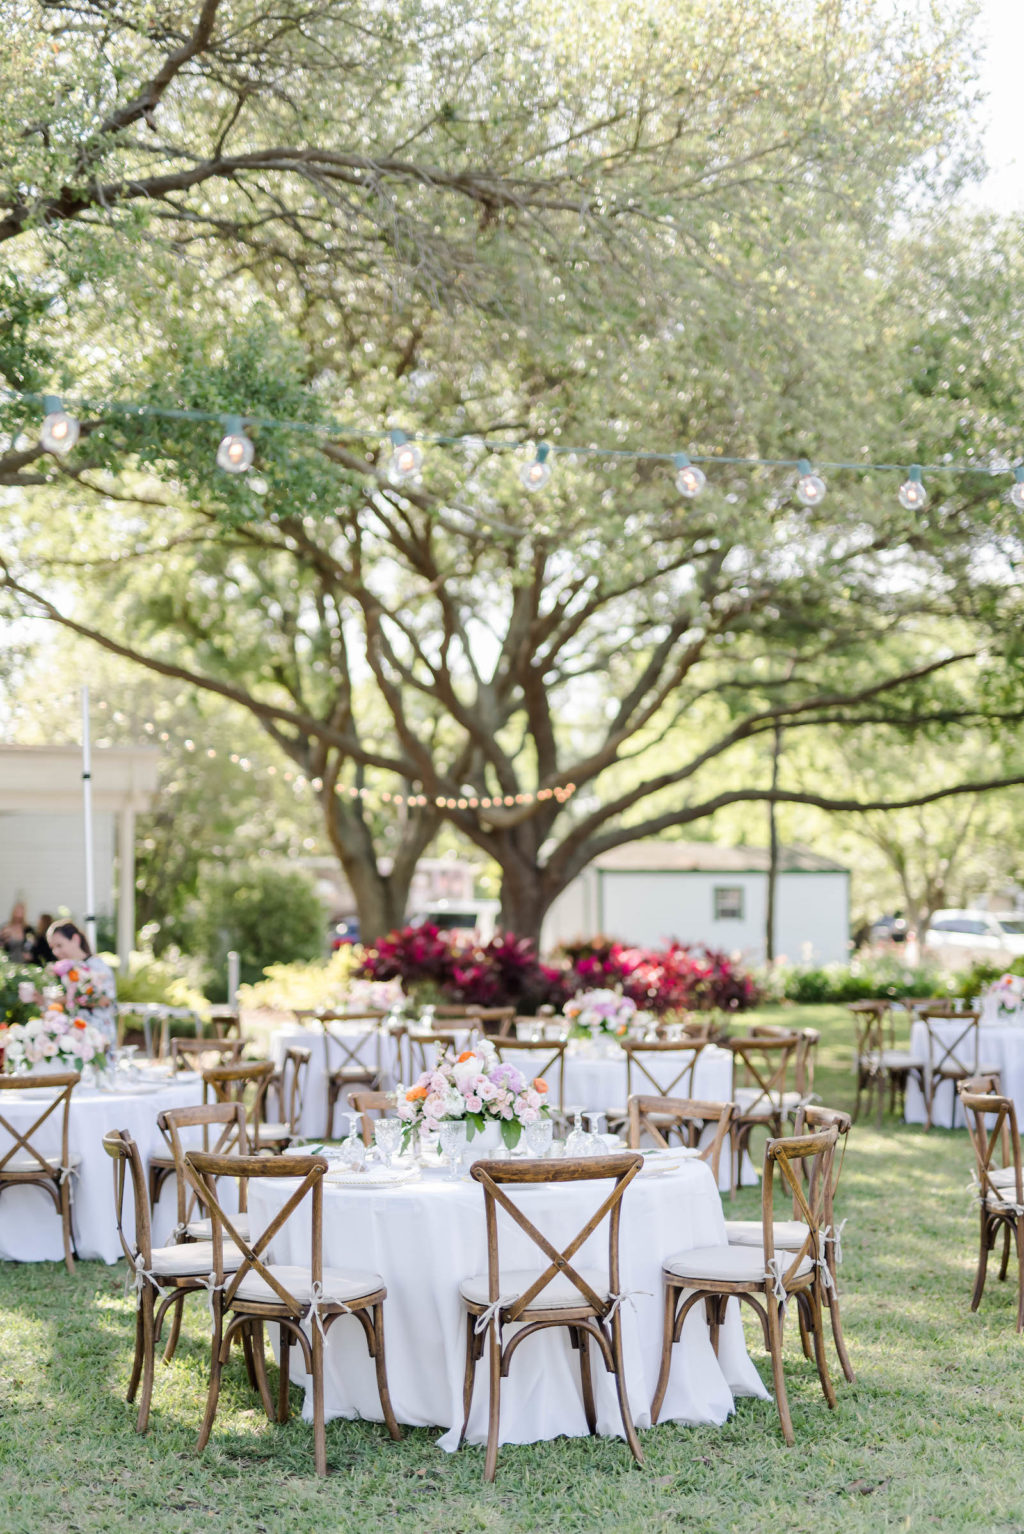 Outdoor Garden Wedding Reception with Wooden French Country Chairs, Round Tables with White Linens and String Lights | Tampa Bay Rental Company Outside the Box Event Rentals | Wedding Planner Special Moments Event Planning | Venue Davis Islands Garden Club